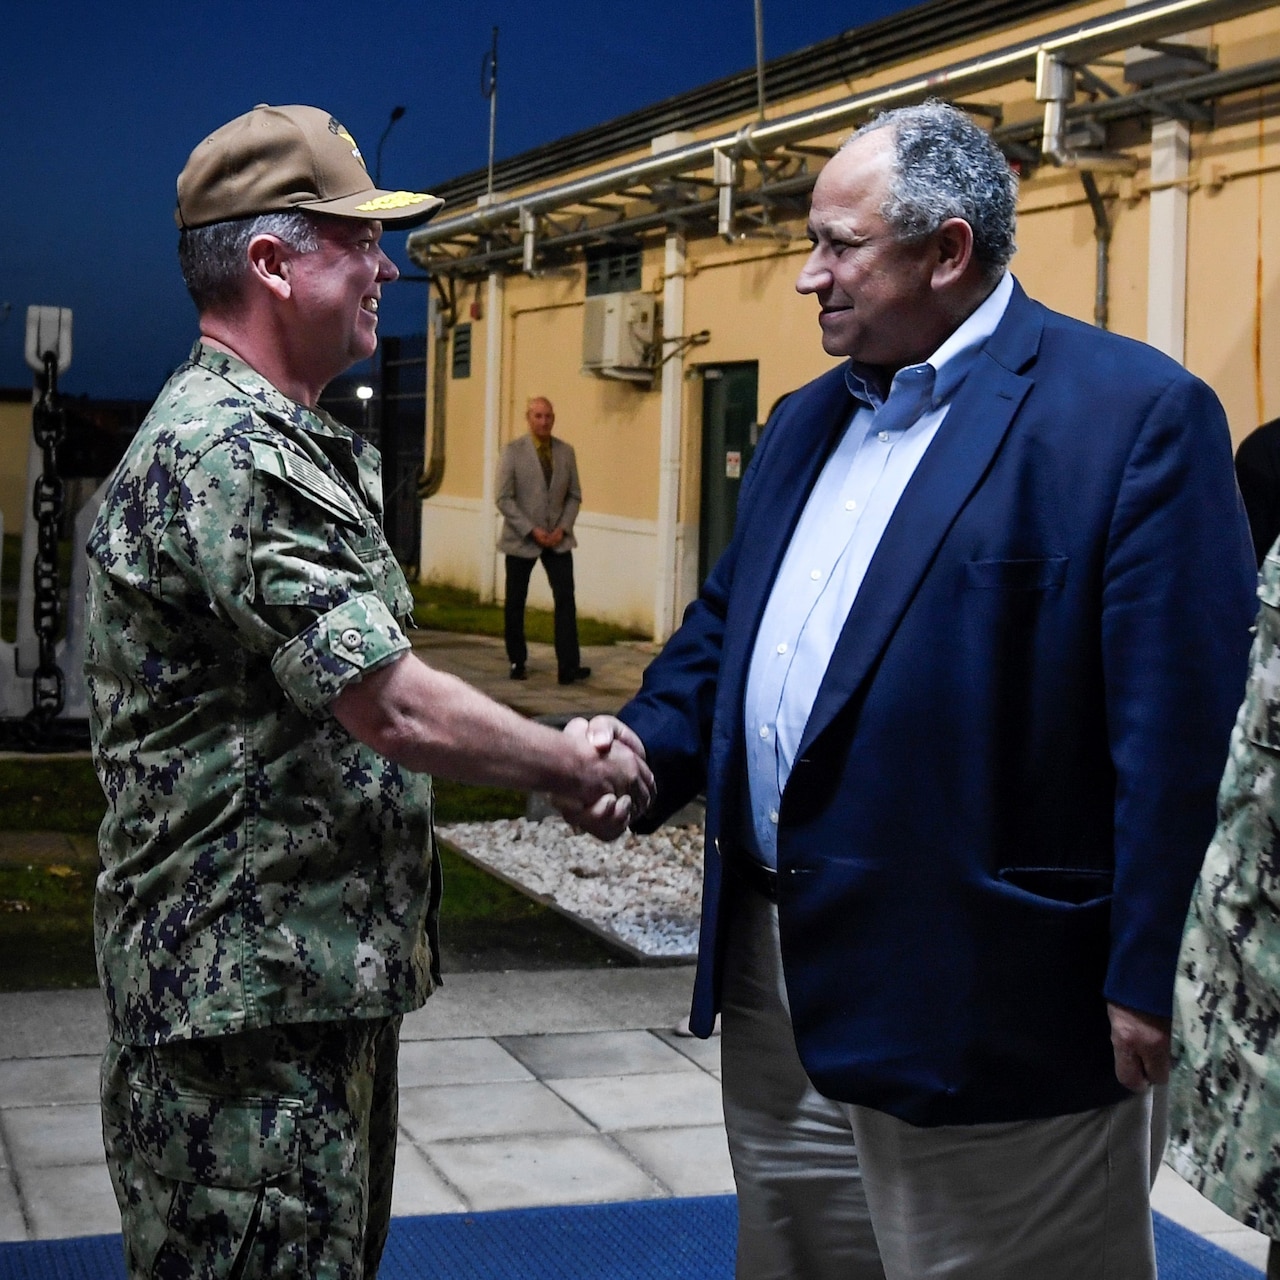 Vice Adm. Tomas Ishee, commander, U.S. Sixth Fleet and commander, Naval Striking and Support Forces NATO, left, greets the Honorable Carlos Del Toro, Secretary of the Navy, as Del Toro arrives onboard Naval Support Activity Naples, Italy for a scheduled visit to U.S. Naval Forces Europe and Africa and U.S. Sixth Fleet (NAVEUR/NAVAF/SIXHFLT) headquarters, Nov. 21, 2022. NAVEUR-NAVAF operates U.S. naval forces in the U.S. European Command (USEUCOM) and U.S. Africa Command (USAFRICOM) areas of responsibility. U.S. Sixth Fleet is permanently assigned to NAVEUR-NAVAF, and employs maritime forces through the full spectrum of joint and naval operations. (U.S. Navy photo by Chief Mass Communication Specialist Justin Stumberg)